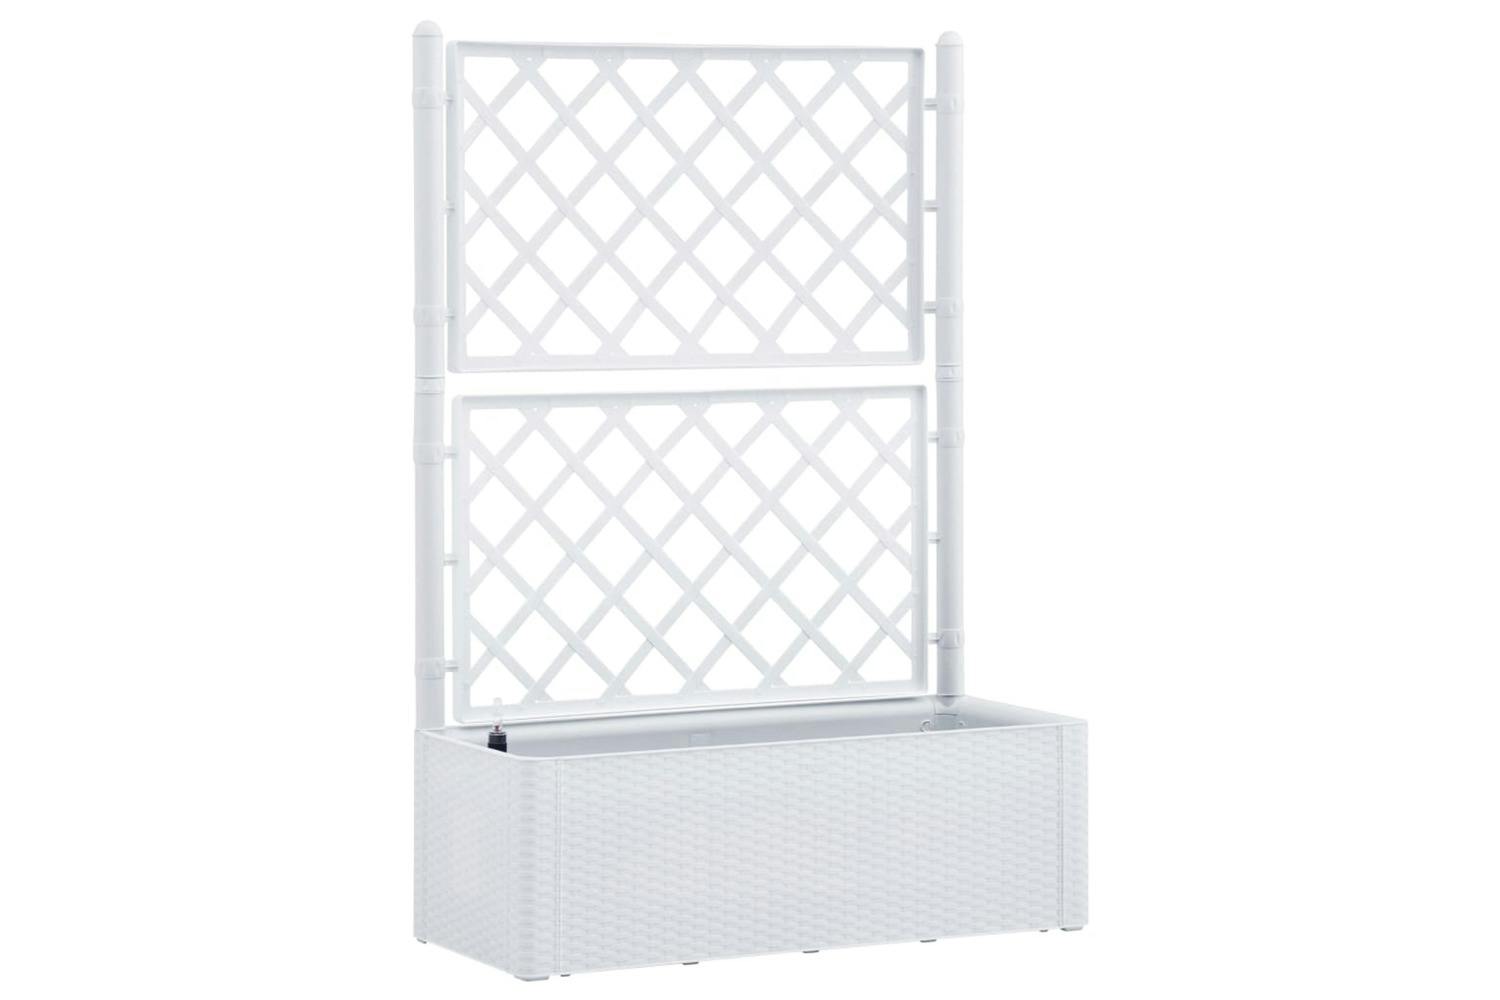 Vidaxl 313967 Garden Raised Bed With Trellis And Self Watering System White